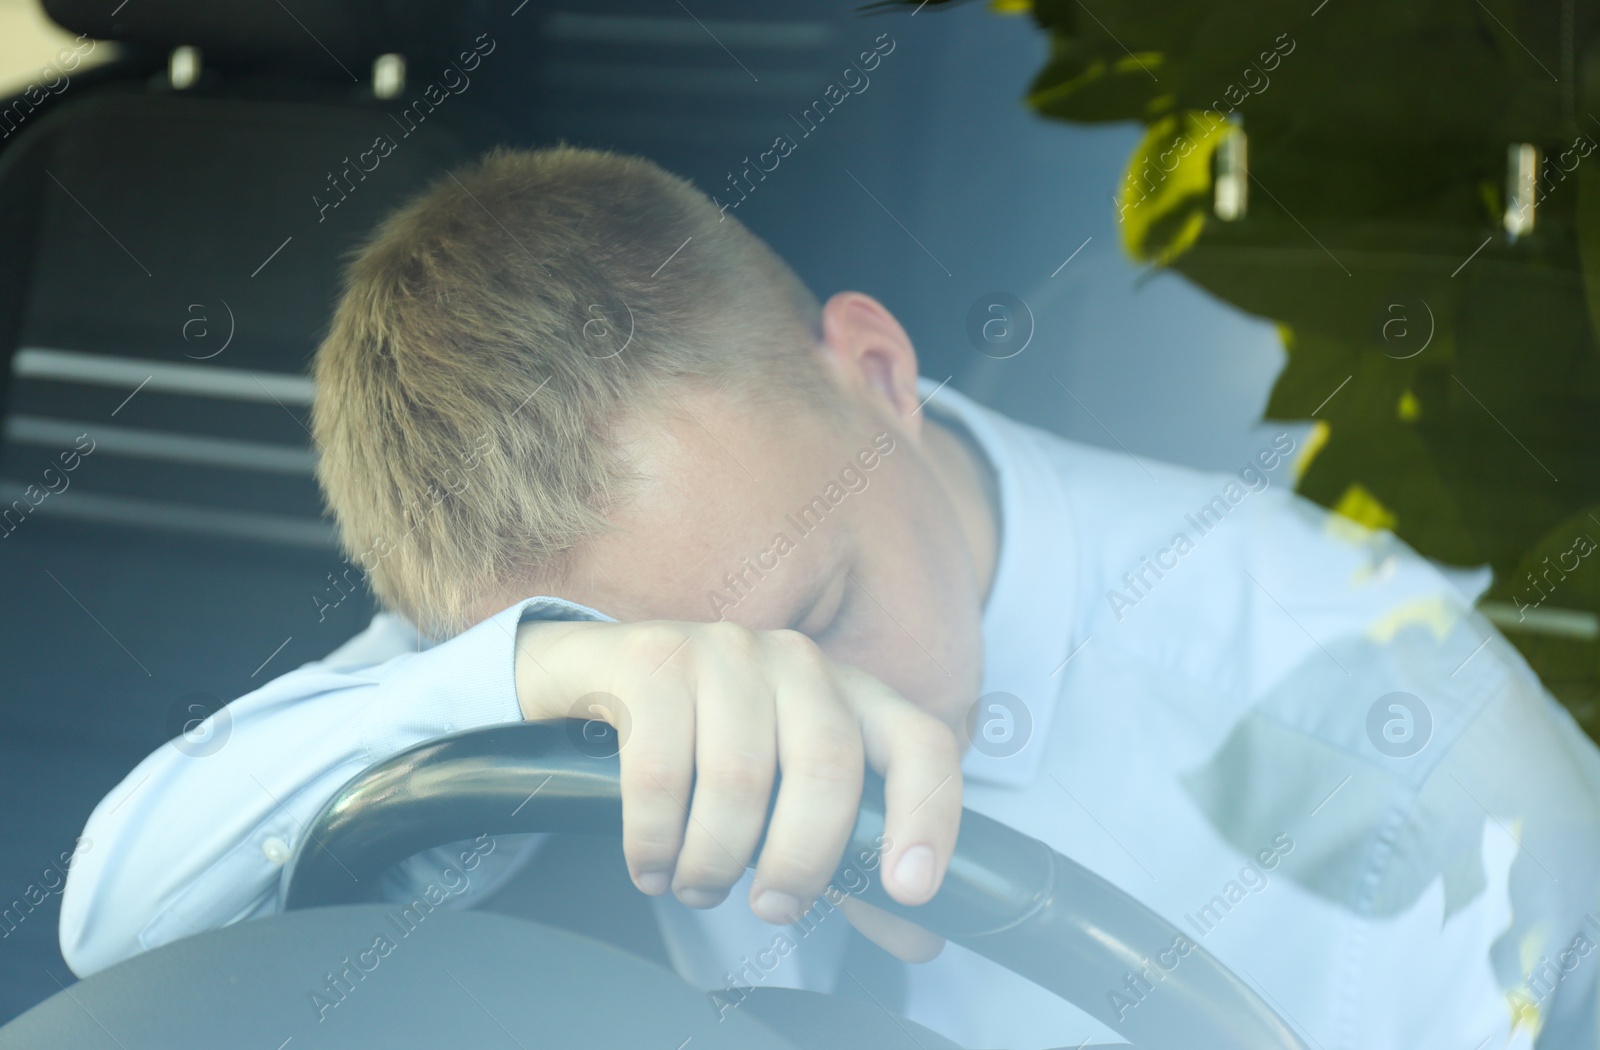 Photo of Tired young man sleeping on steering wheel in his car, view from outside